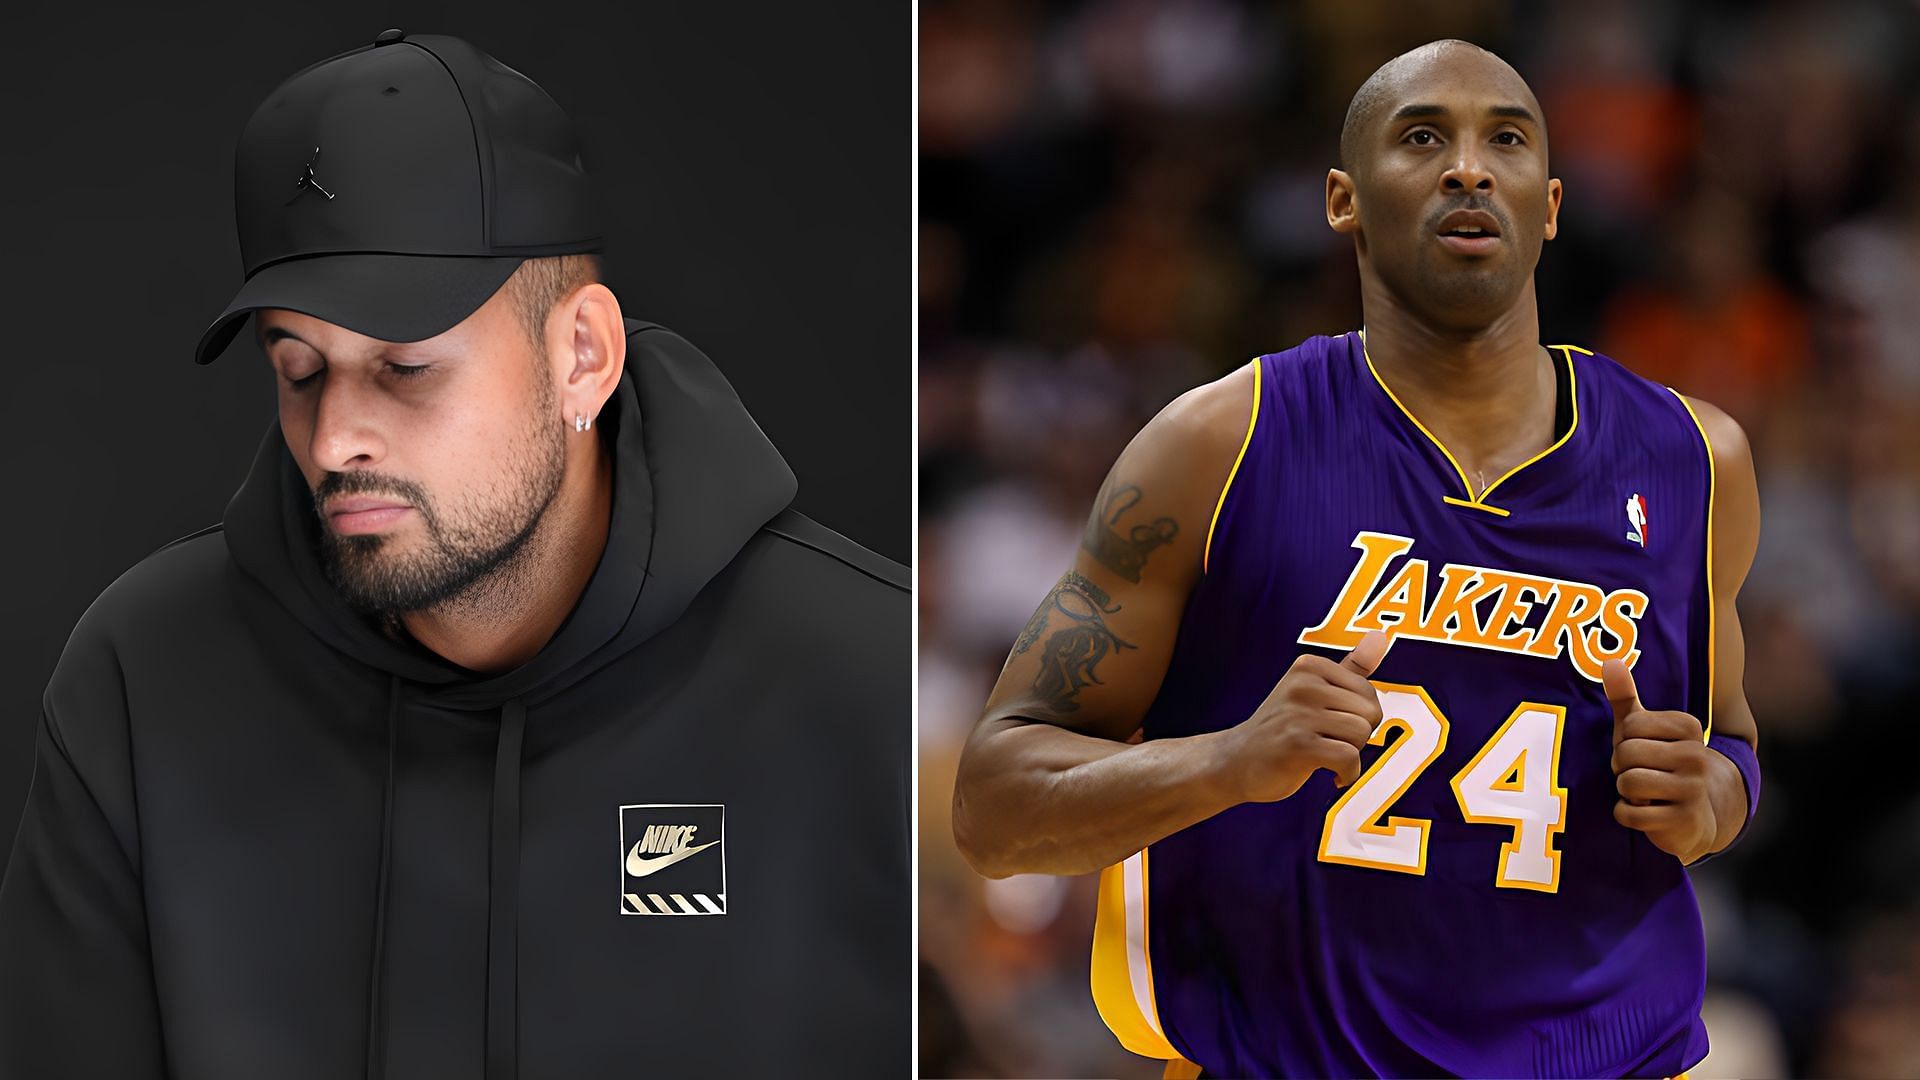 Nick Kyrgios paid tribute to Kobe Bryant as he donned the late basketball legend